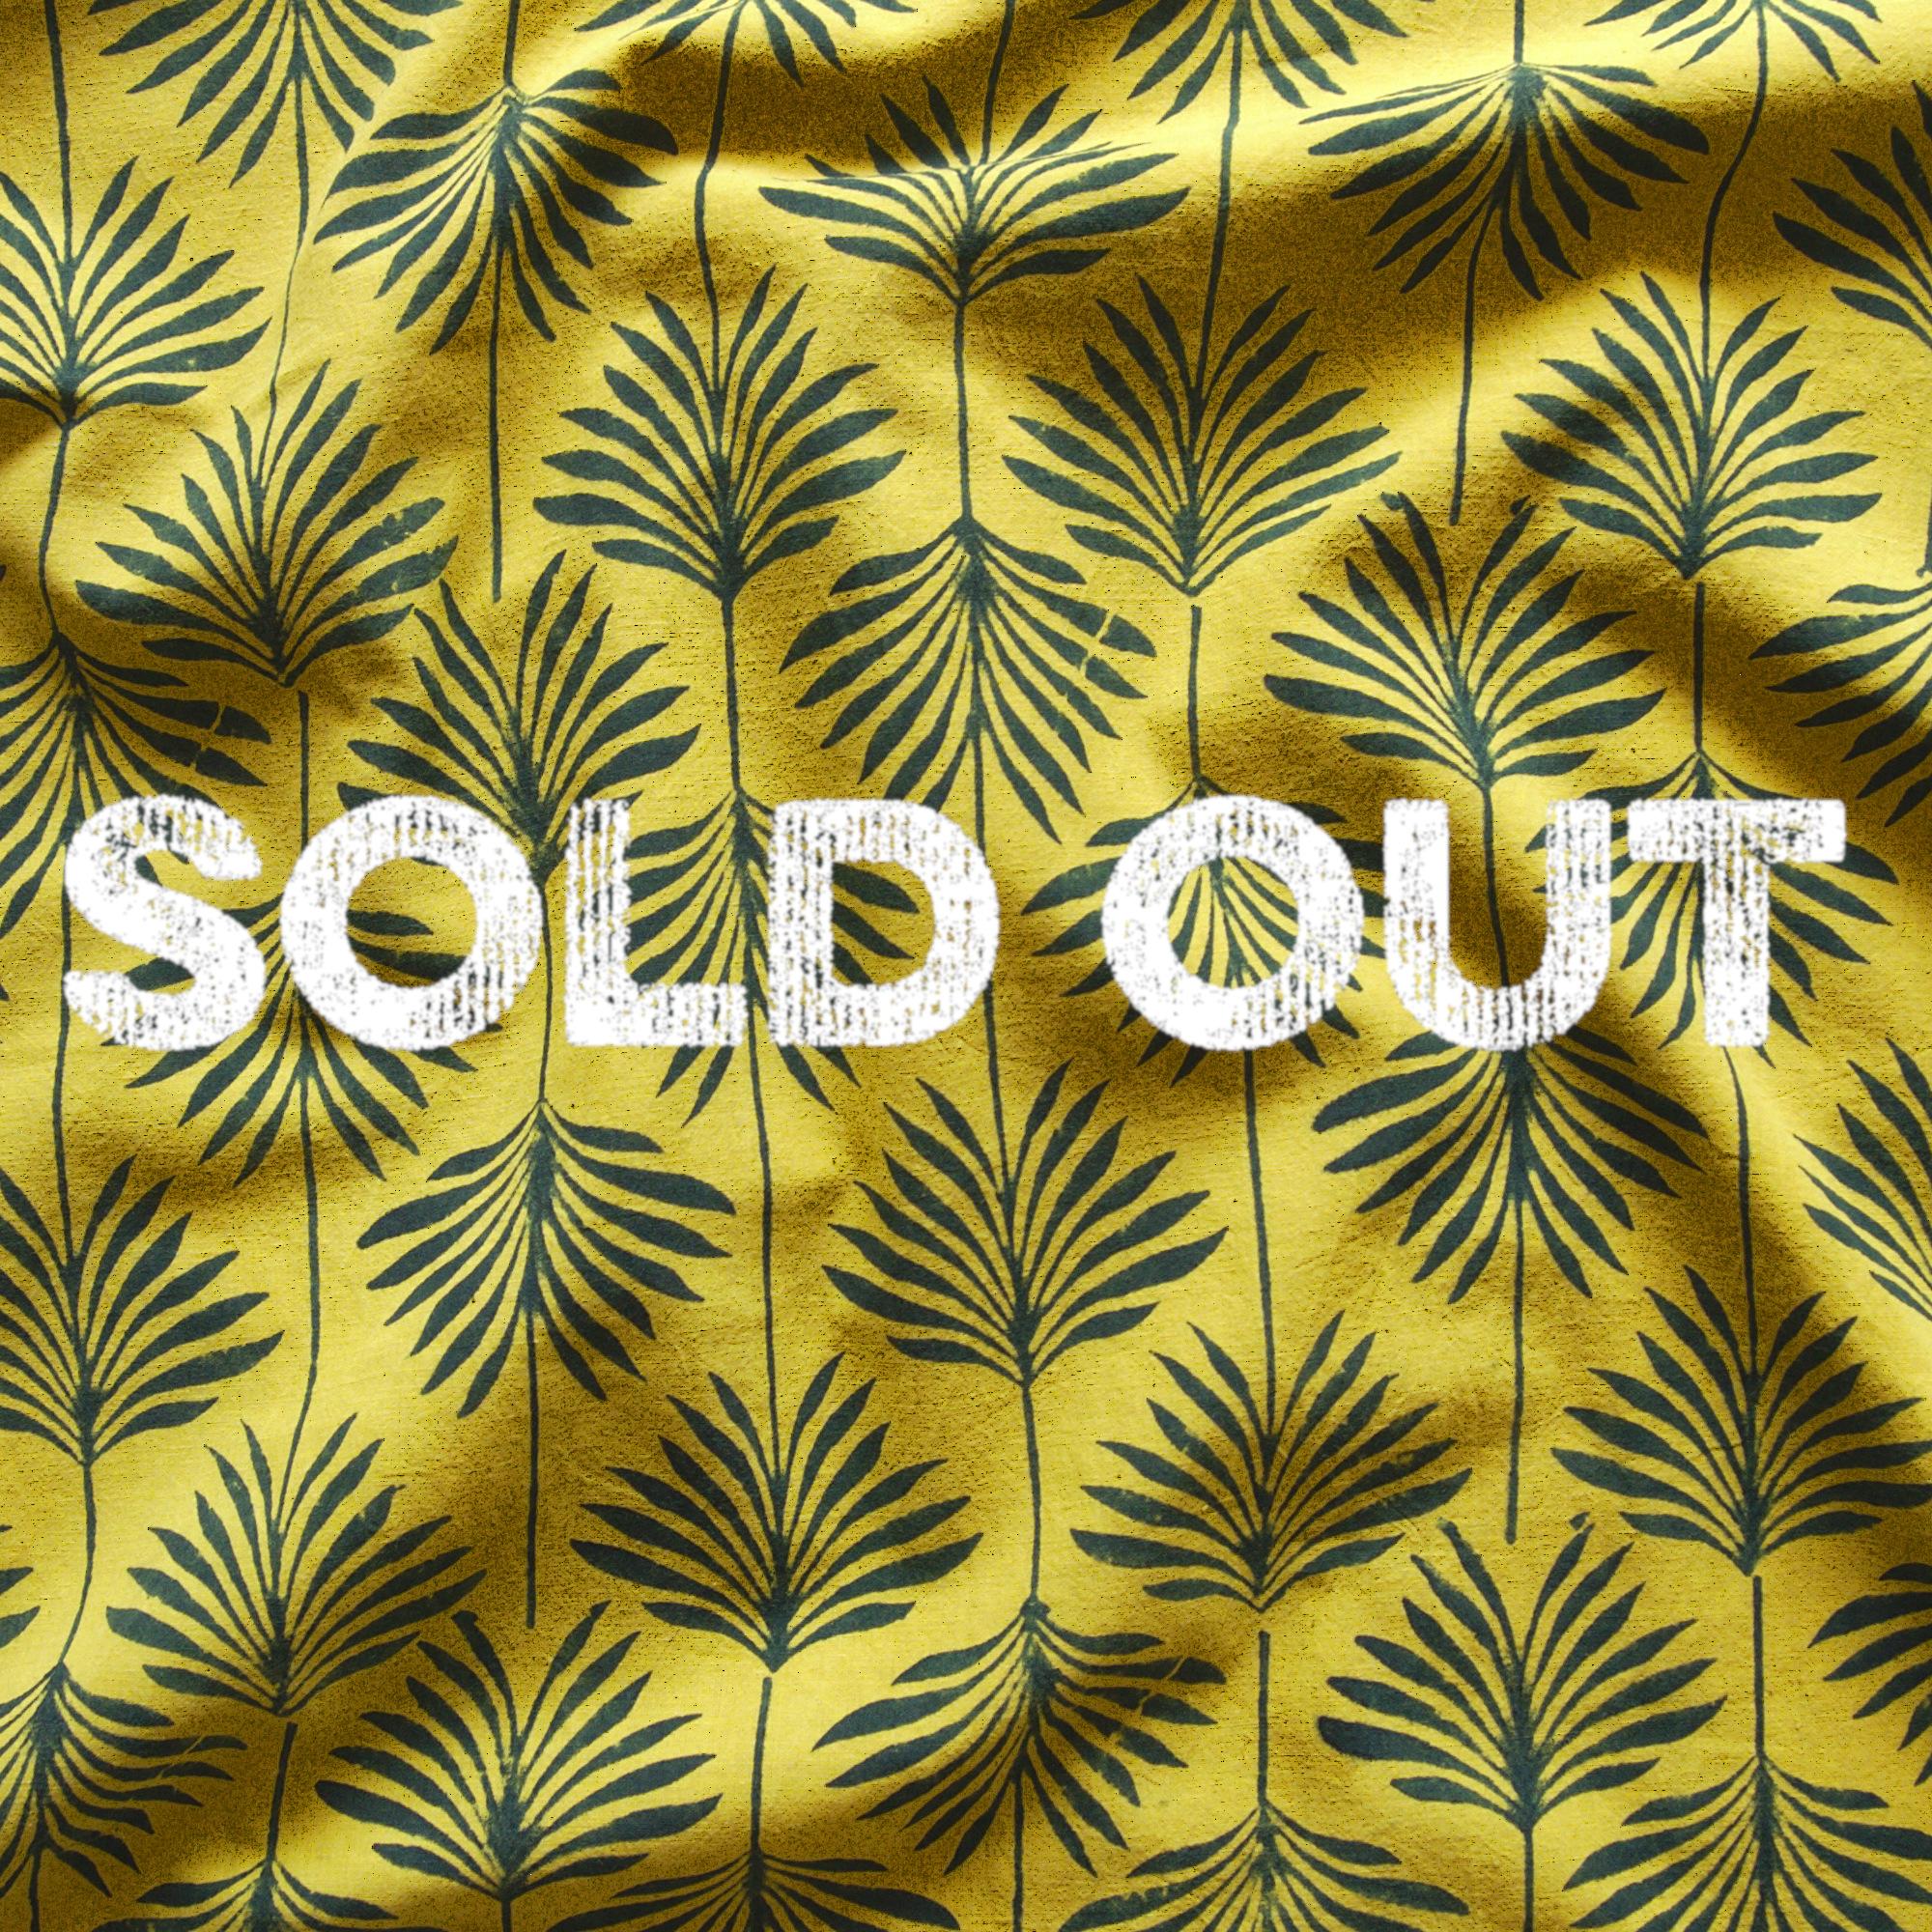 SIK14 - Indian Block-Printed Cotton Fabric - Palm Leaf Design - Pomegranate Yellow and Green Indigo Dye - Contrast